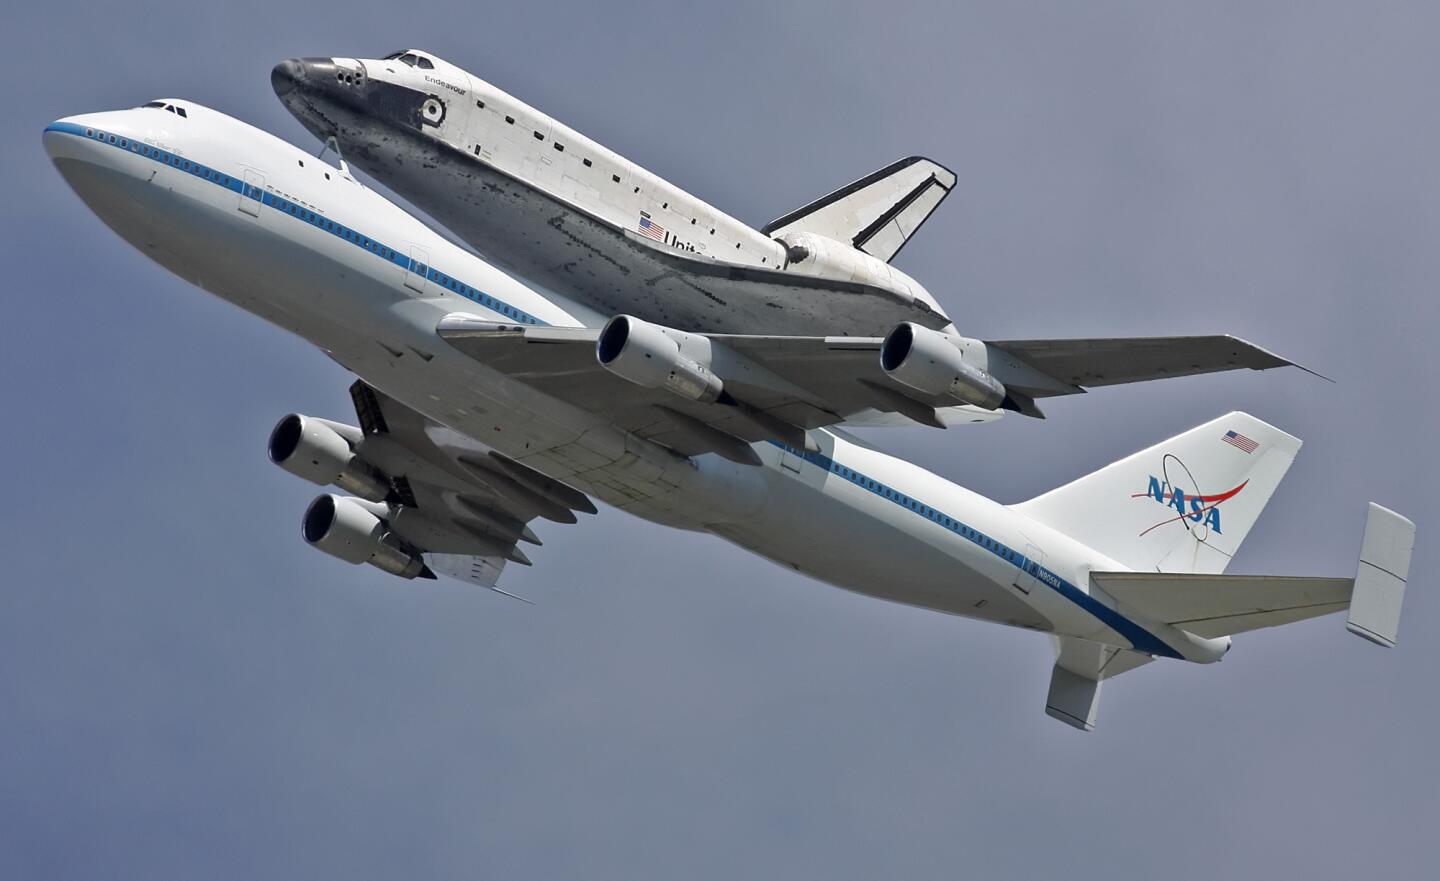 Photo Gallery: Space shuttle passes overhead